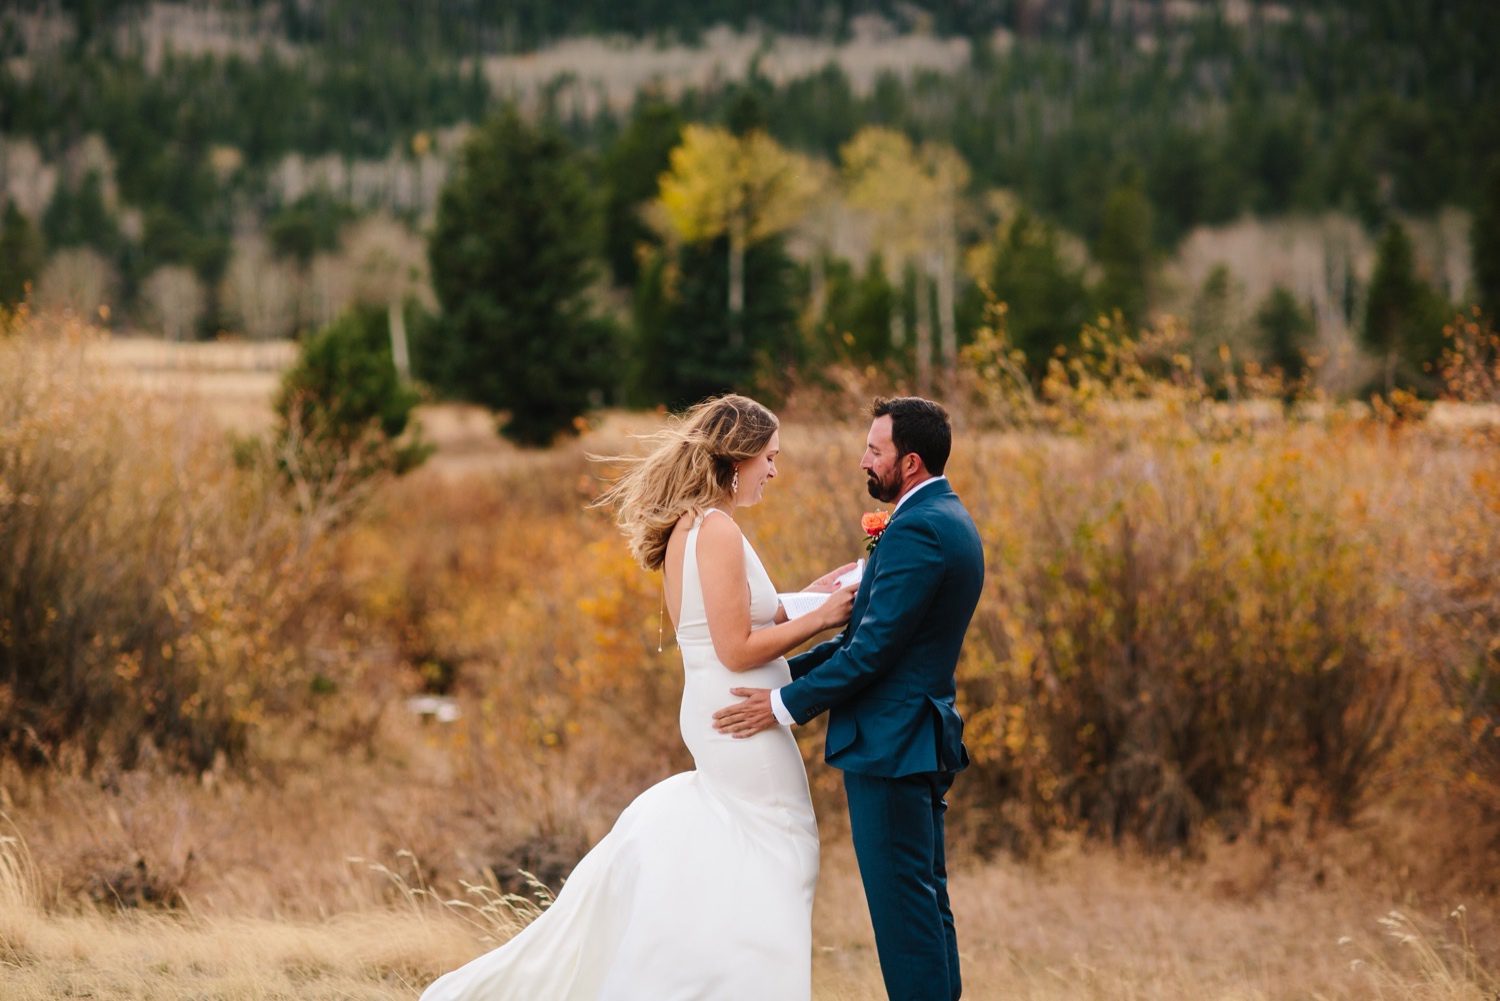 Estes Park Micro Wedding Elopement with first look in Rocky Mountain National Park, Micro Wedding, Small Wedding, Intimate Wedding, Elopement, Elopement Photography, Mountain Wedding, Mountain Elopement, Elopement Planning, Elopement Ideas, Elopement Inspiration, Rocky Mountain National Park, Eloping with family, Colorado elopement guide, Ideas for eloping, Pandemic wedding, COVID-19 Wedding, Covid-19 elopement, Fall Wedding, Fall Elopement, Rocky Mountain Bride, Martha Stewart Weddings